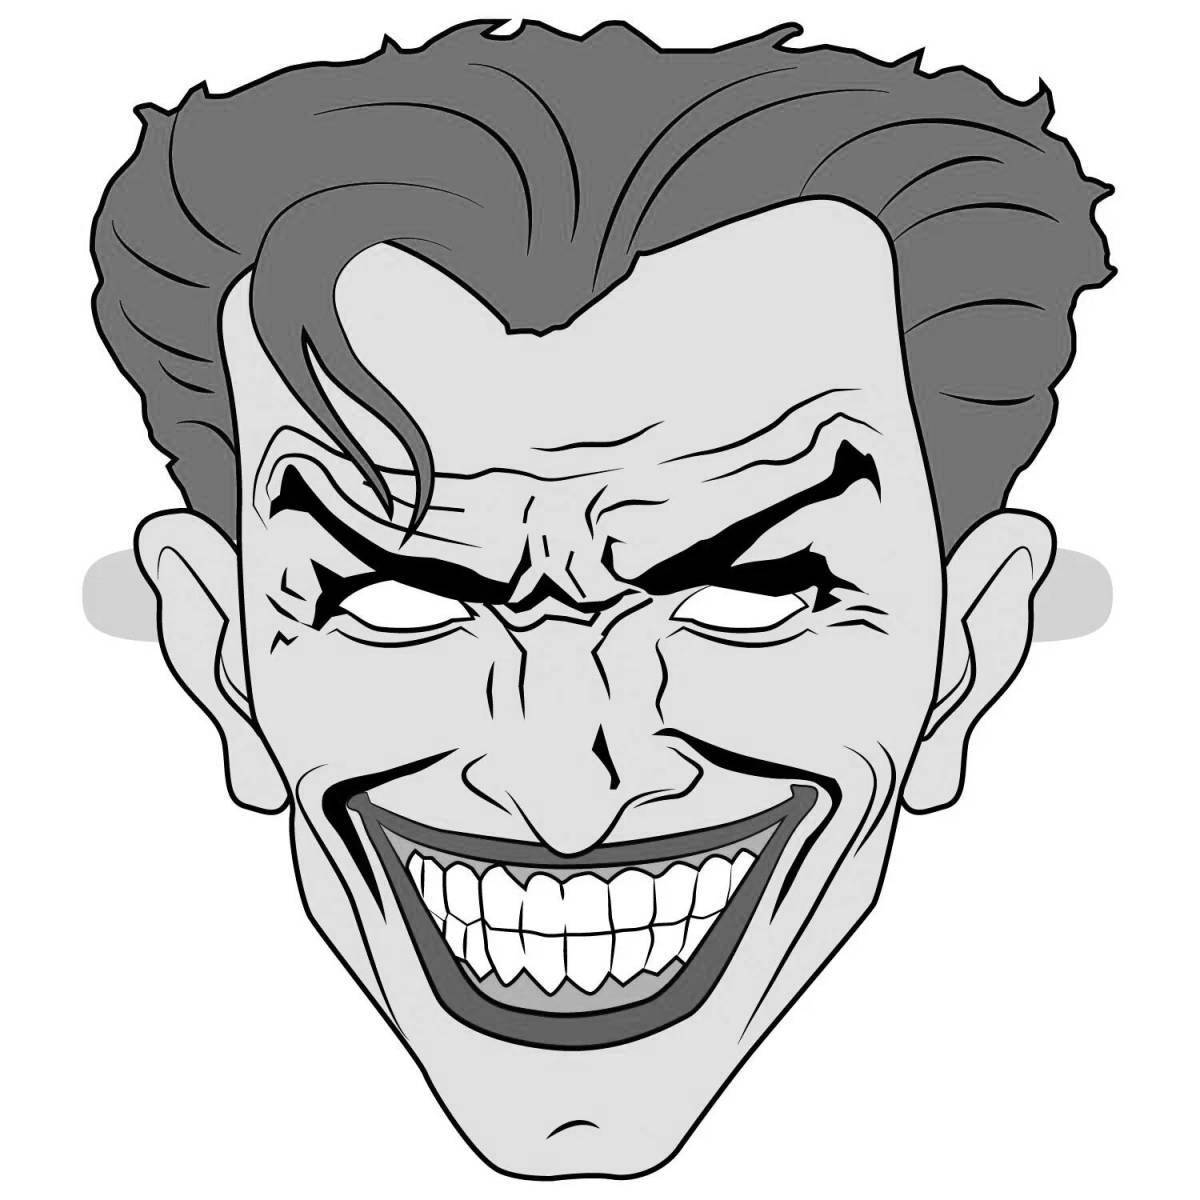 Attractive joker face coloring page